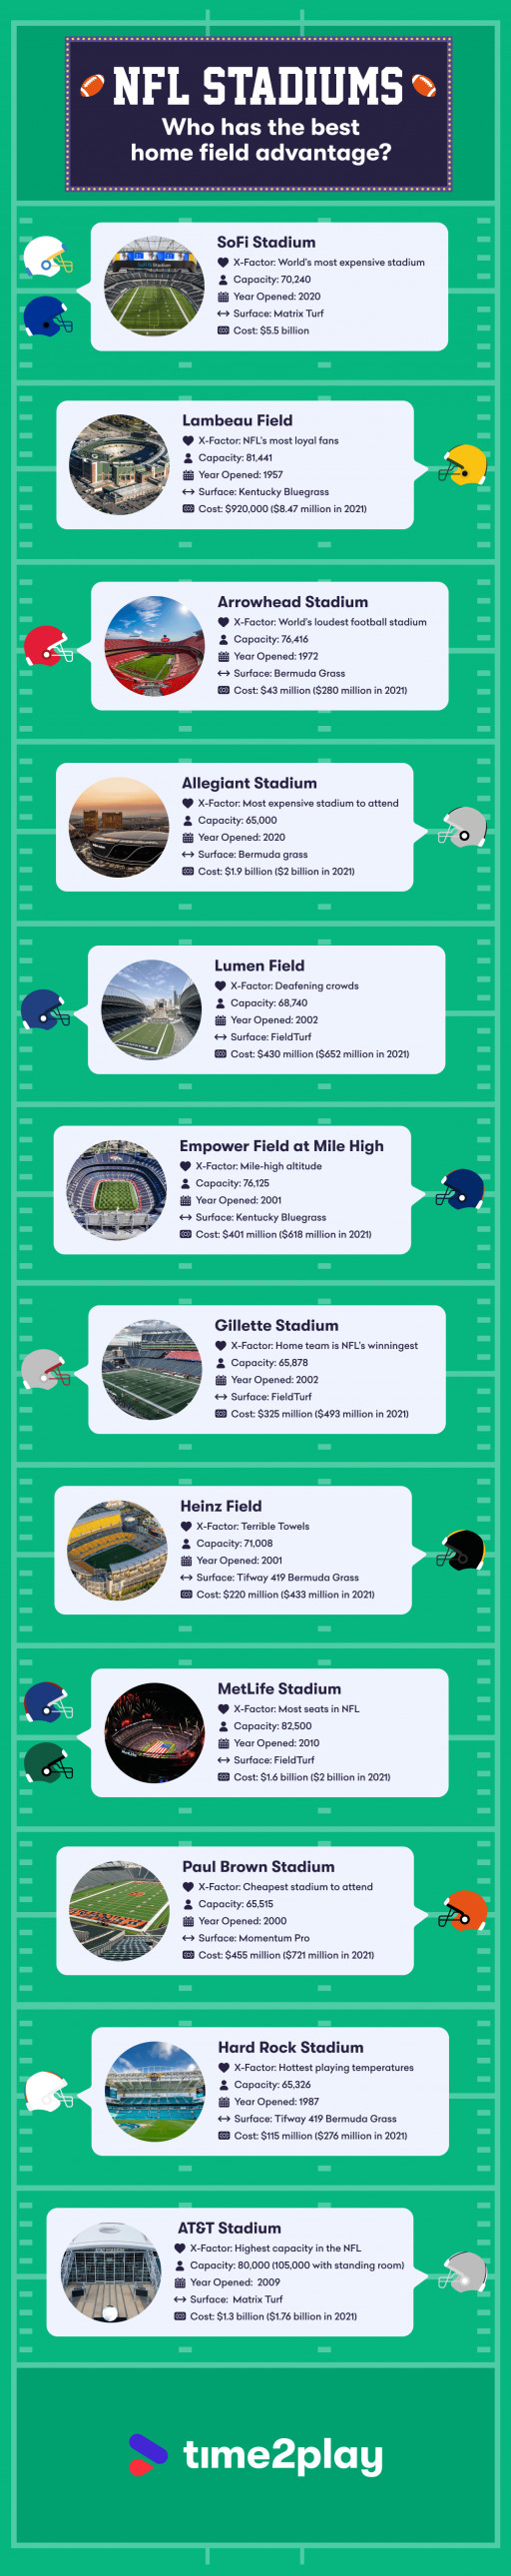 NFL Stadiums with the best home advantage